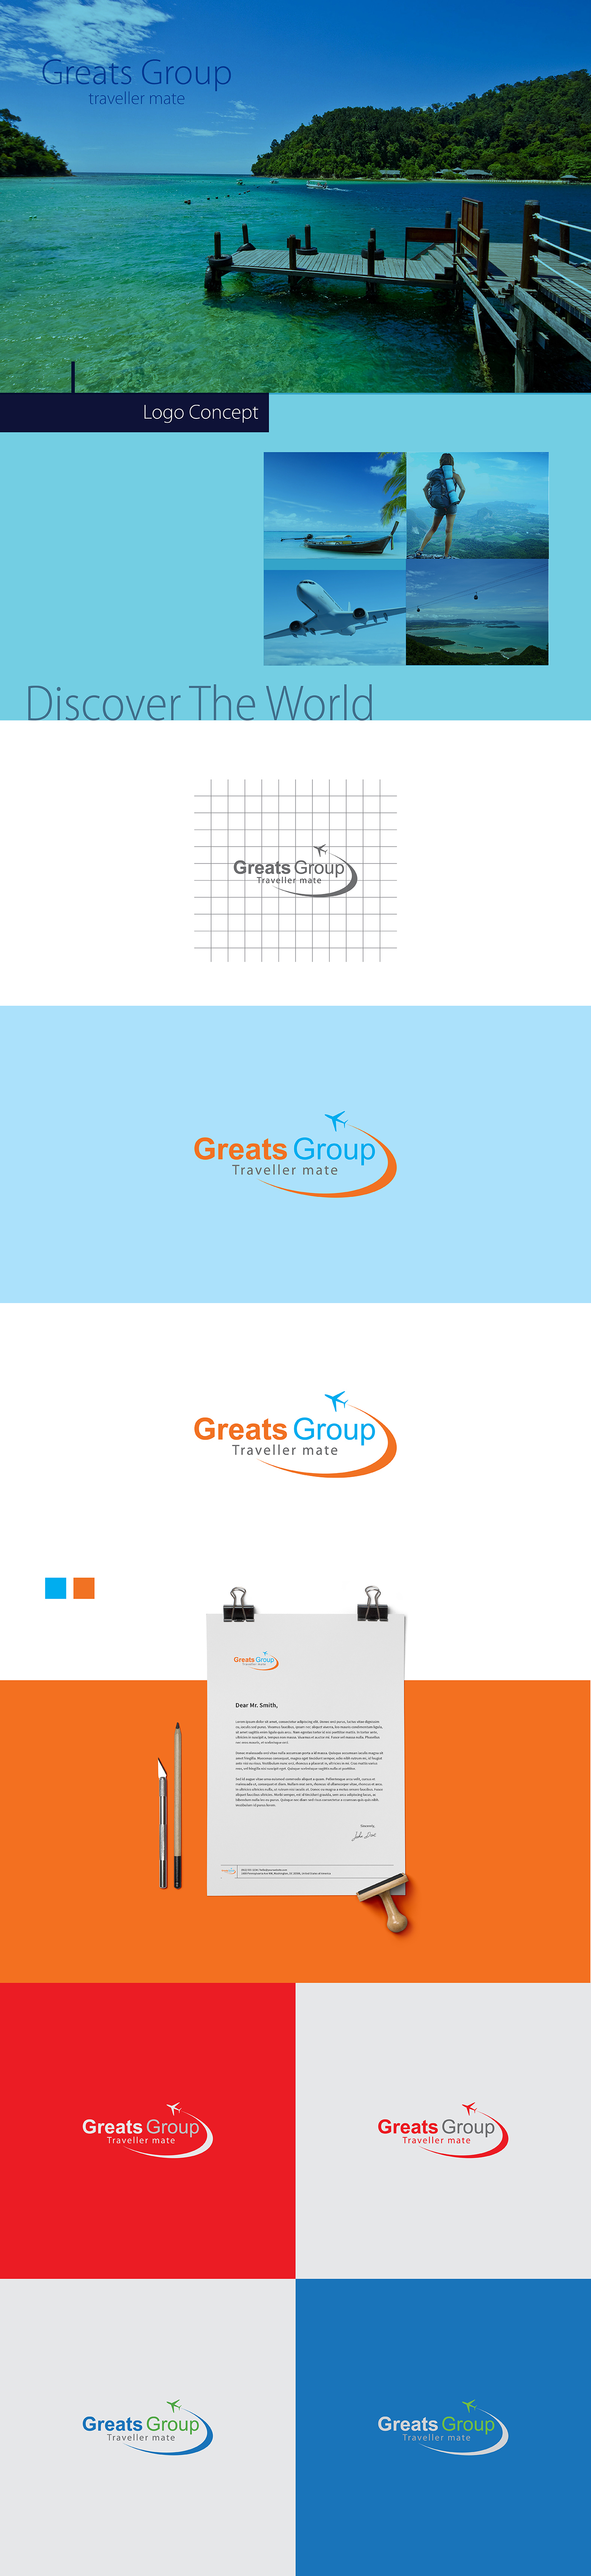 ggreats group